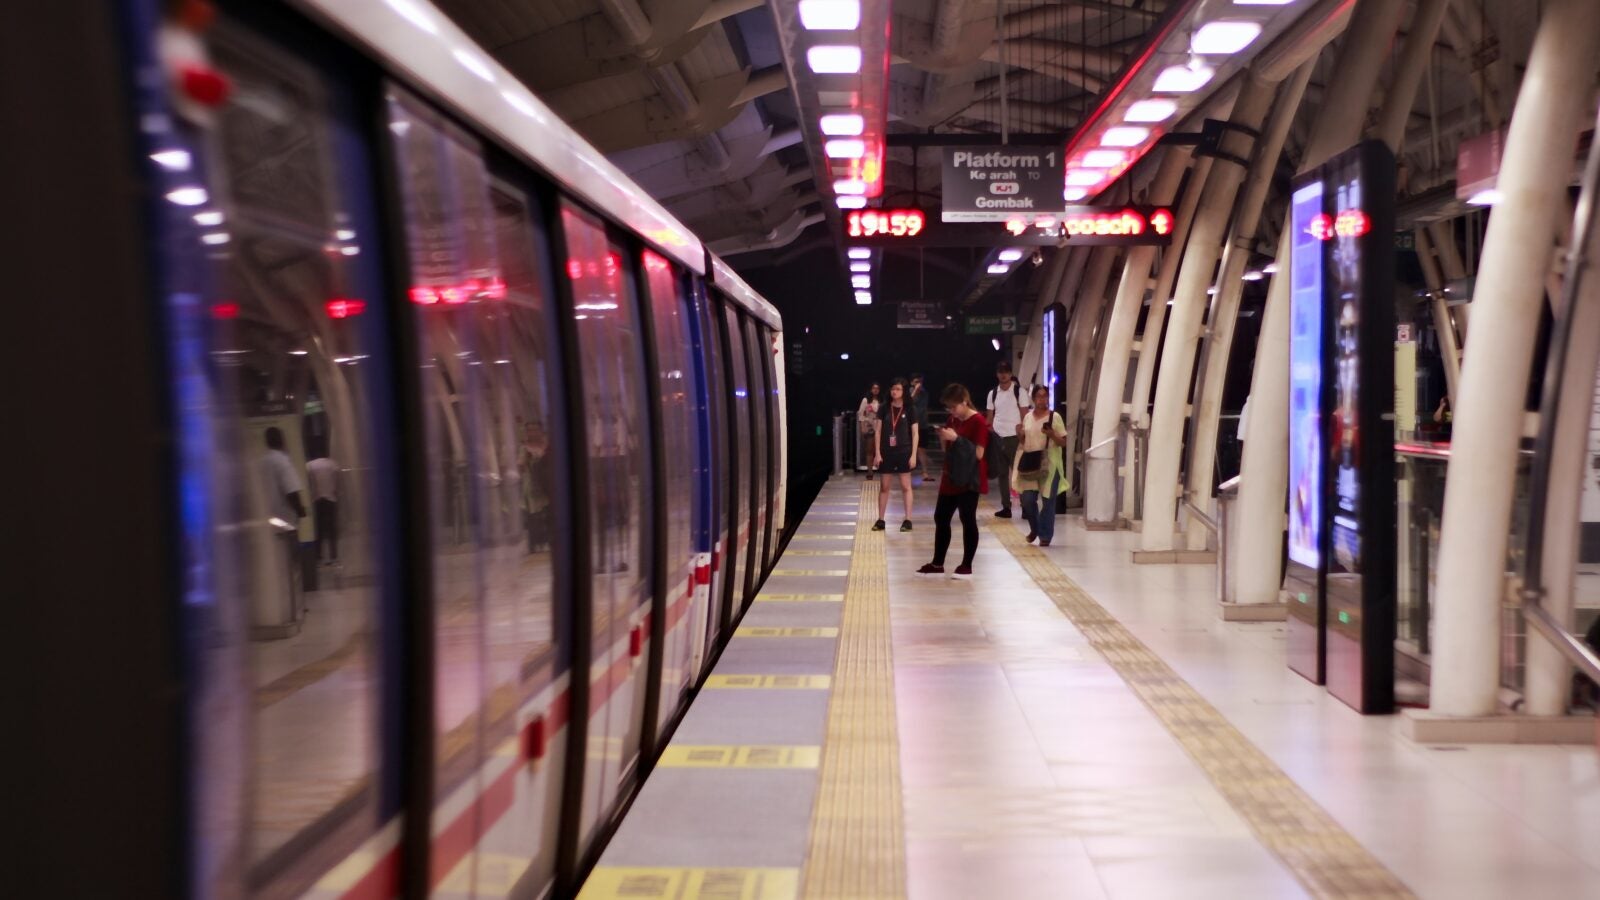 Image shows a wide shot of the waiting area at an LRT station. There are people at the far end, away from the camera. A train is stationed with its door closed at the left side of the image.